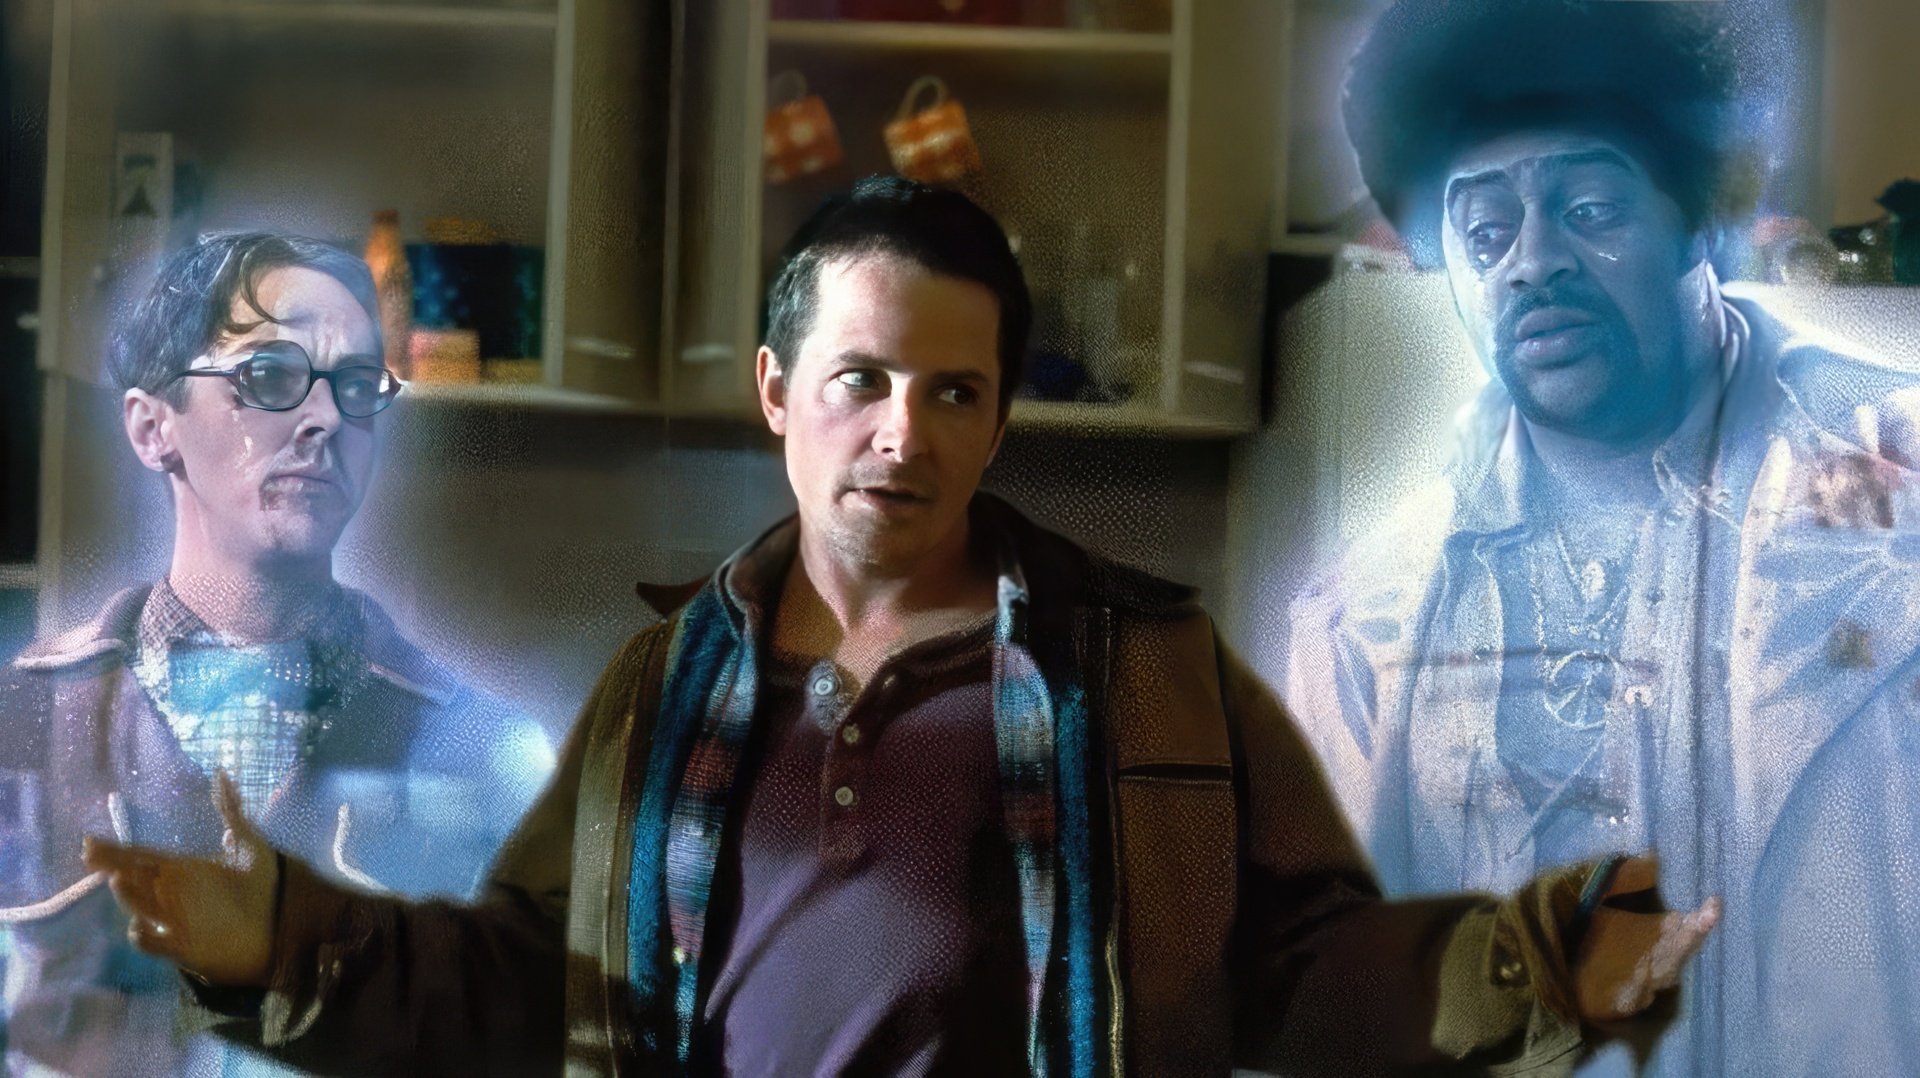 A still from The Frighteners